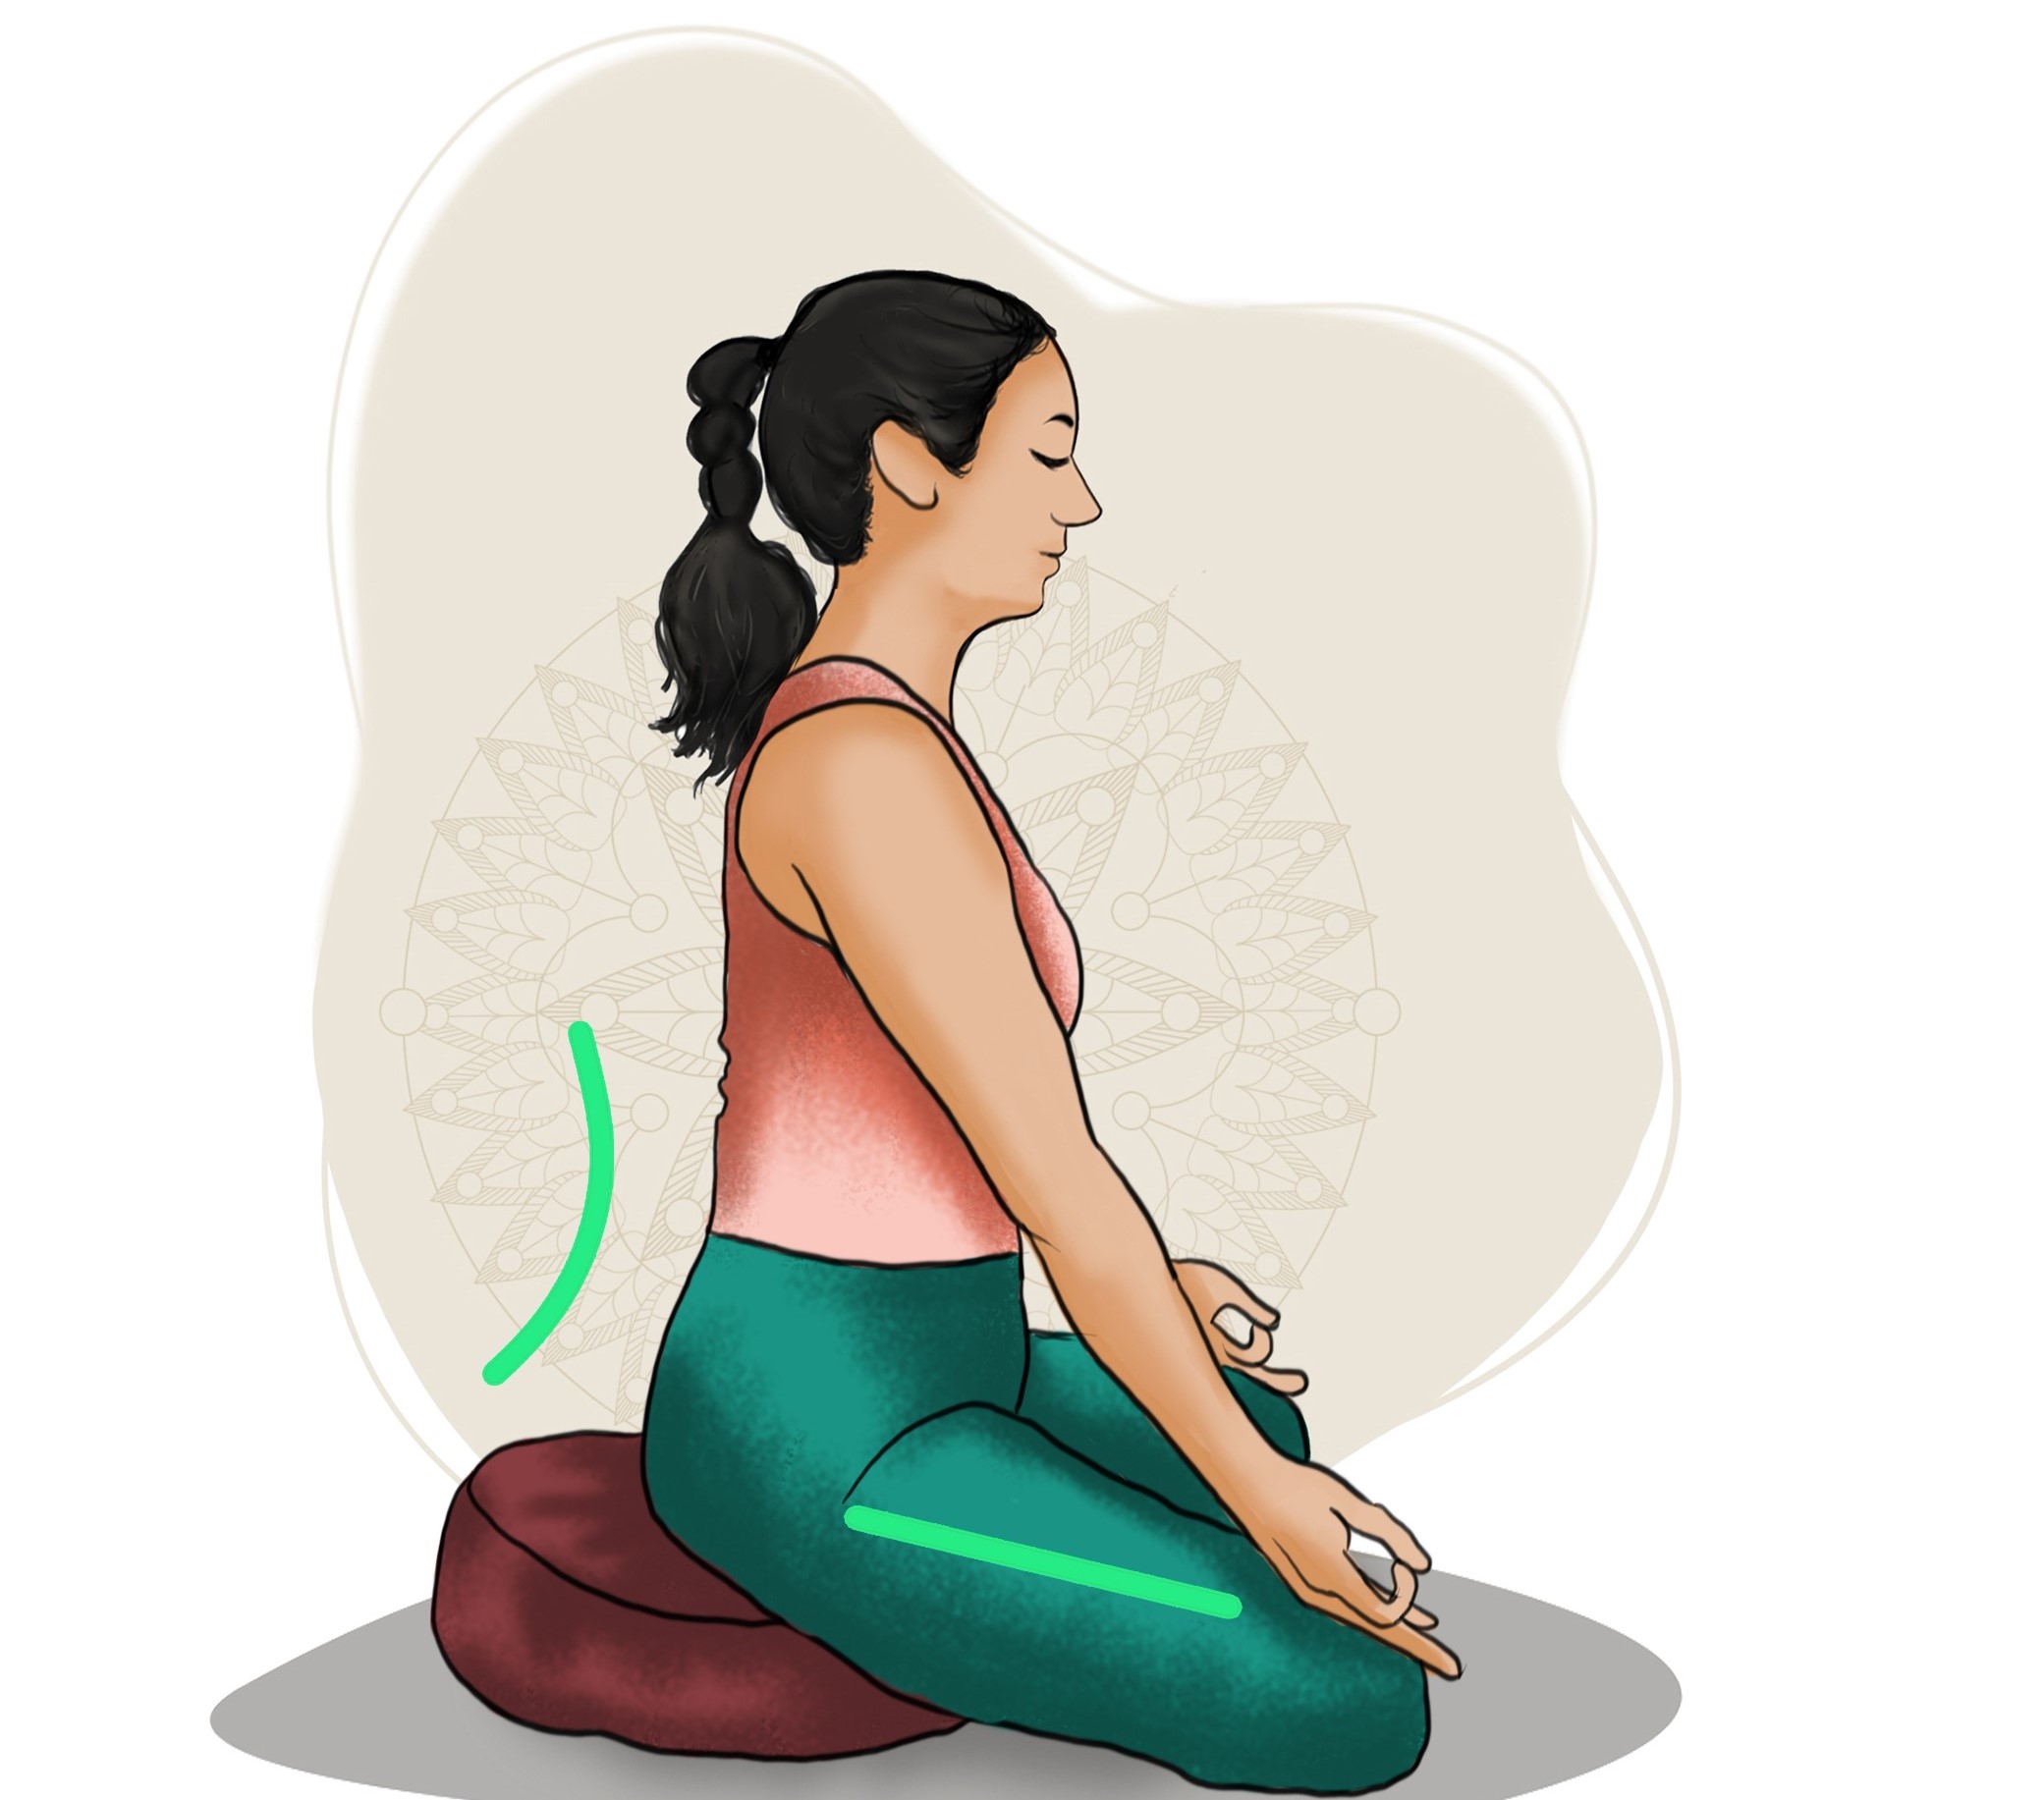 3 Simple Seated Twist Yoga Poses For Relaxation - The Wellness Corner